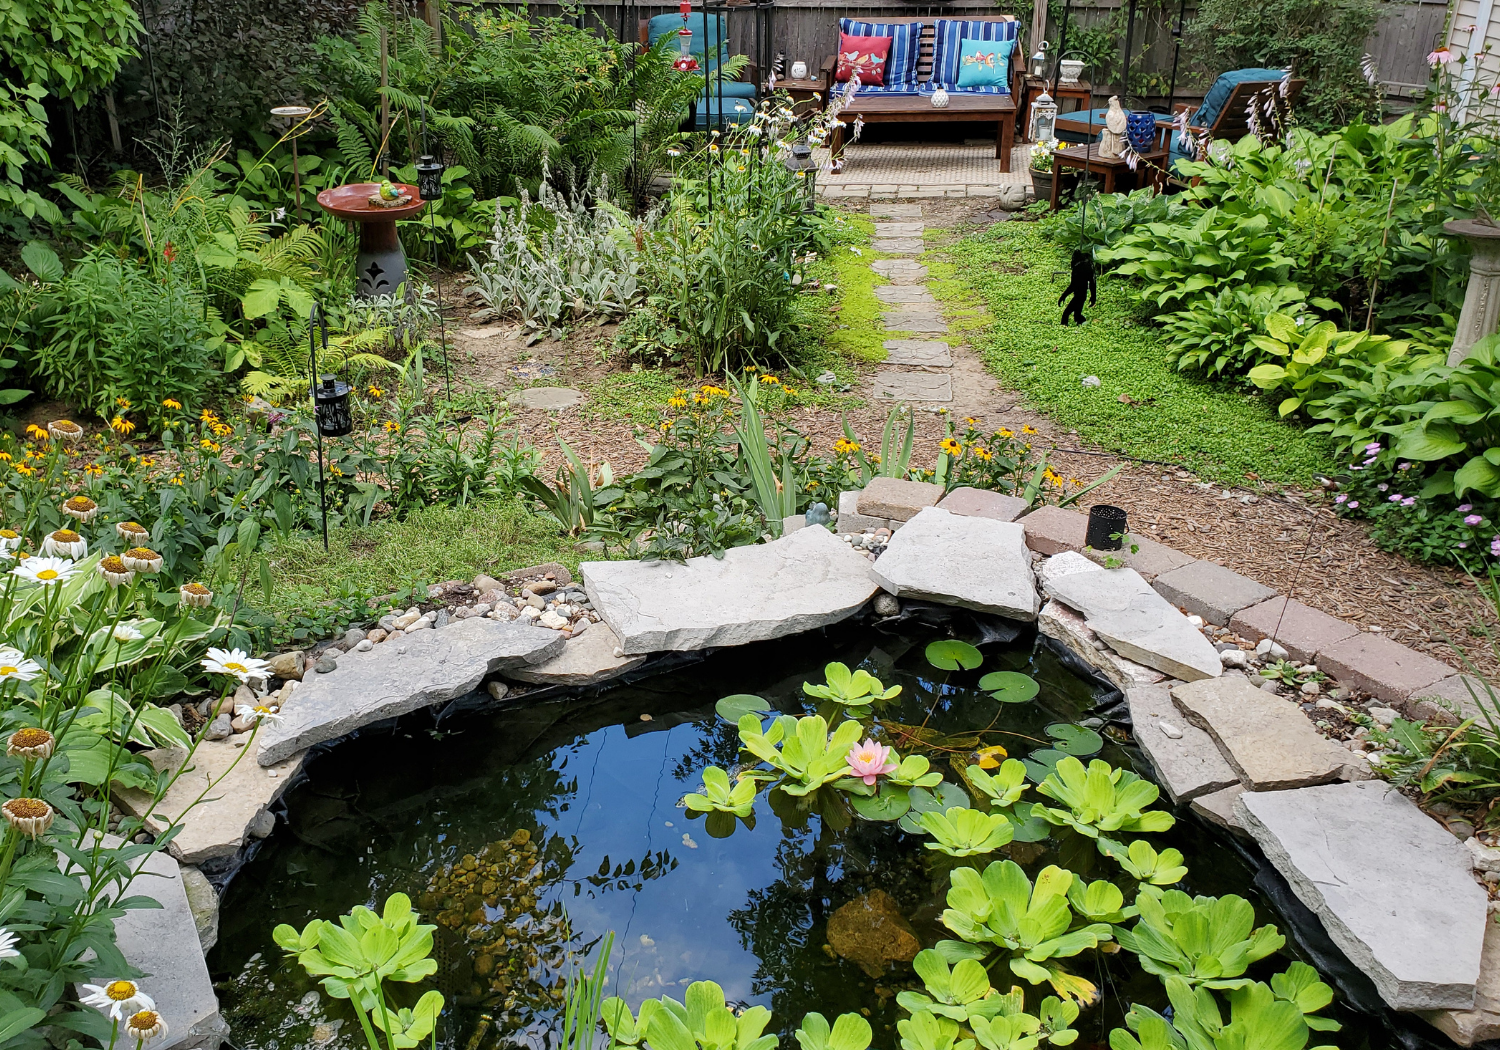 One of two wildlife ponds that Kate installed to provide respite for frogs, toads, and other wildlife.